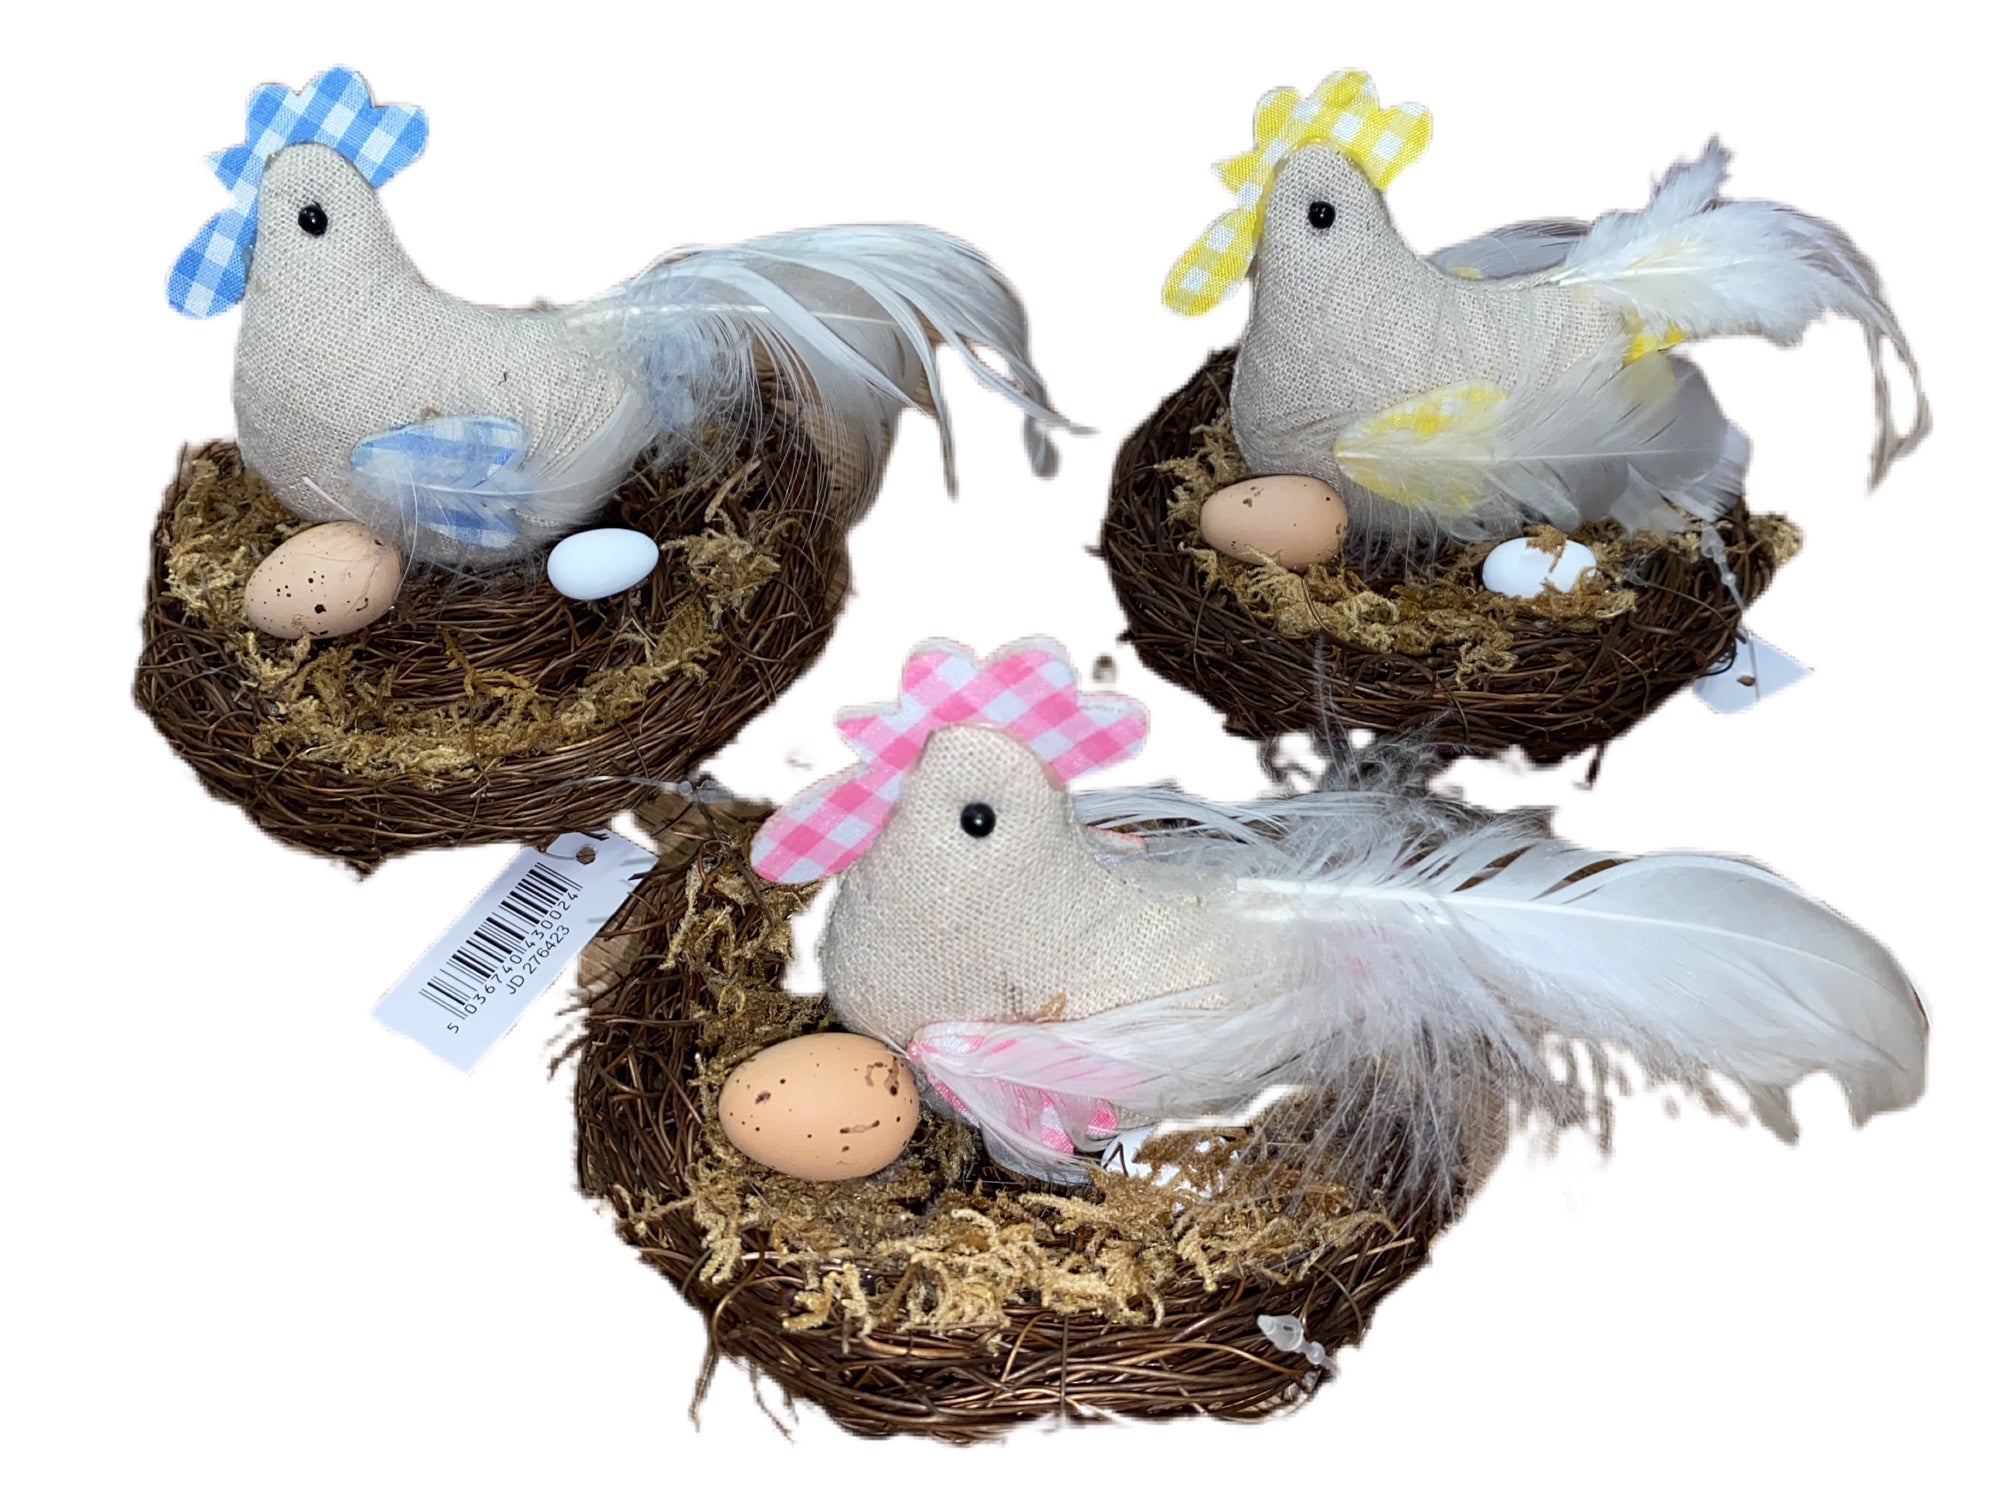 Decorative Easter Chicken with Eggs in Nest - The Cooks Cupboard Ltd